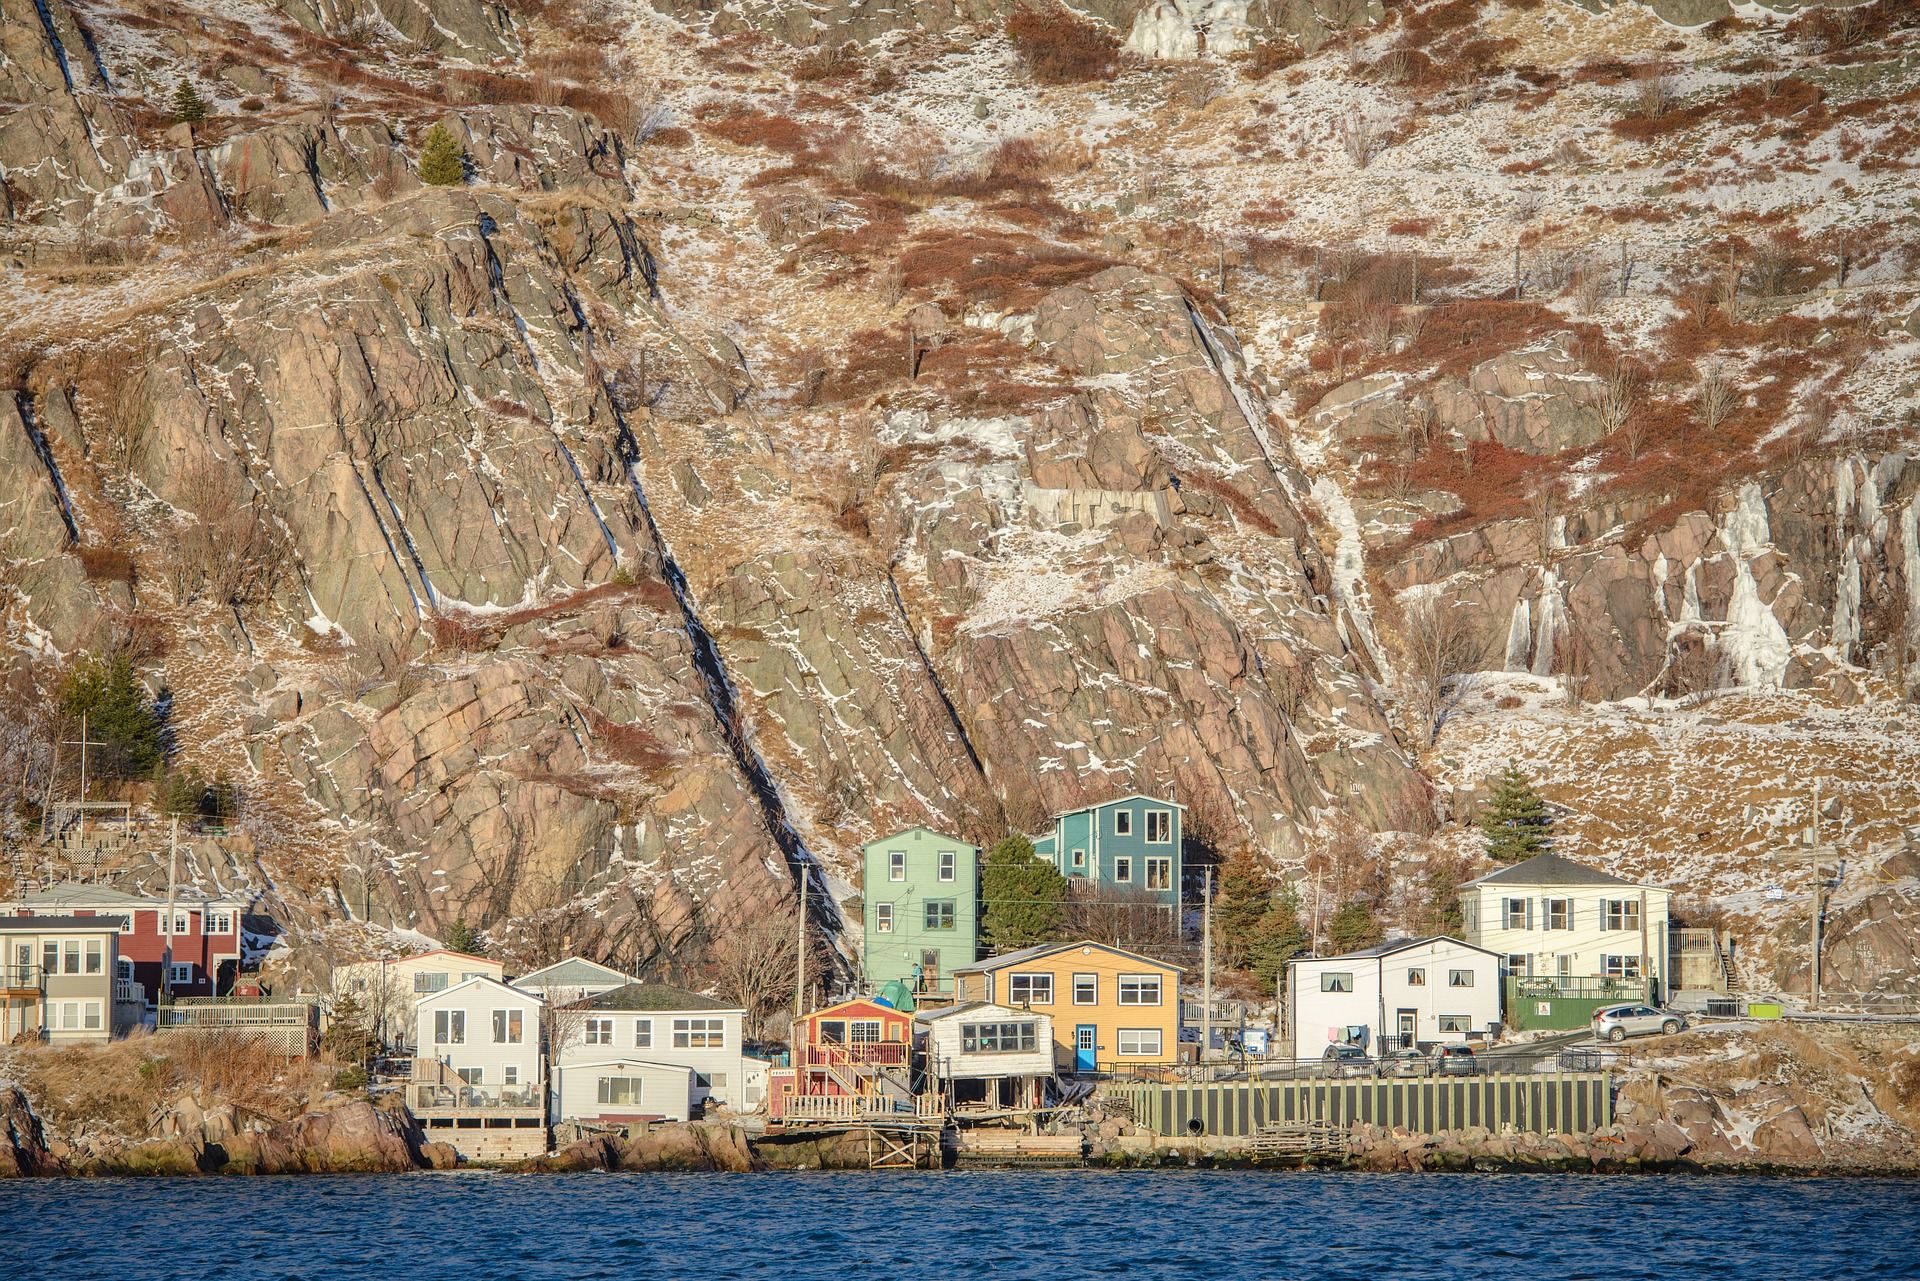 Houses occupy a thin strip of coast against a vertical cliff.